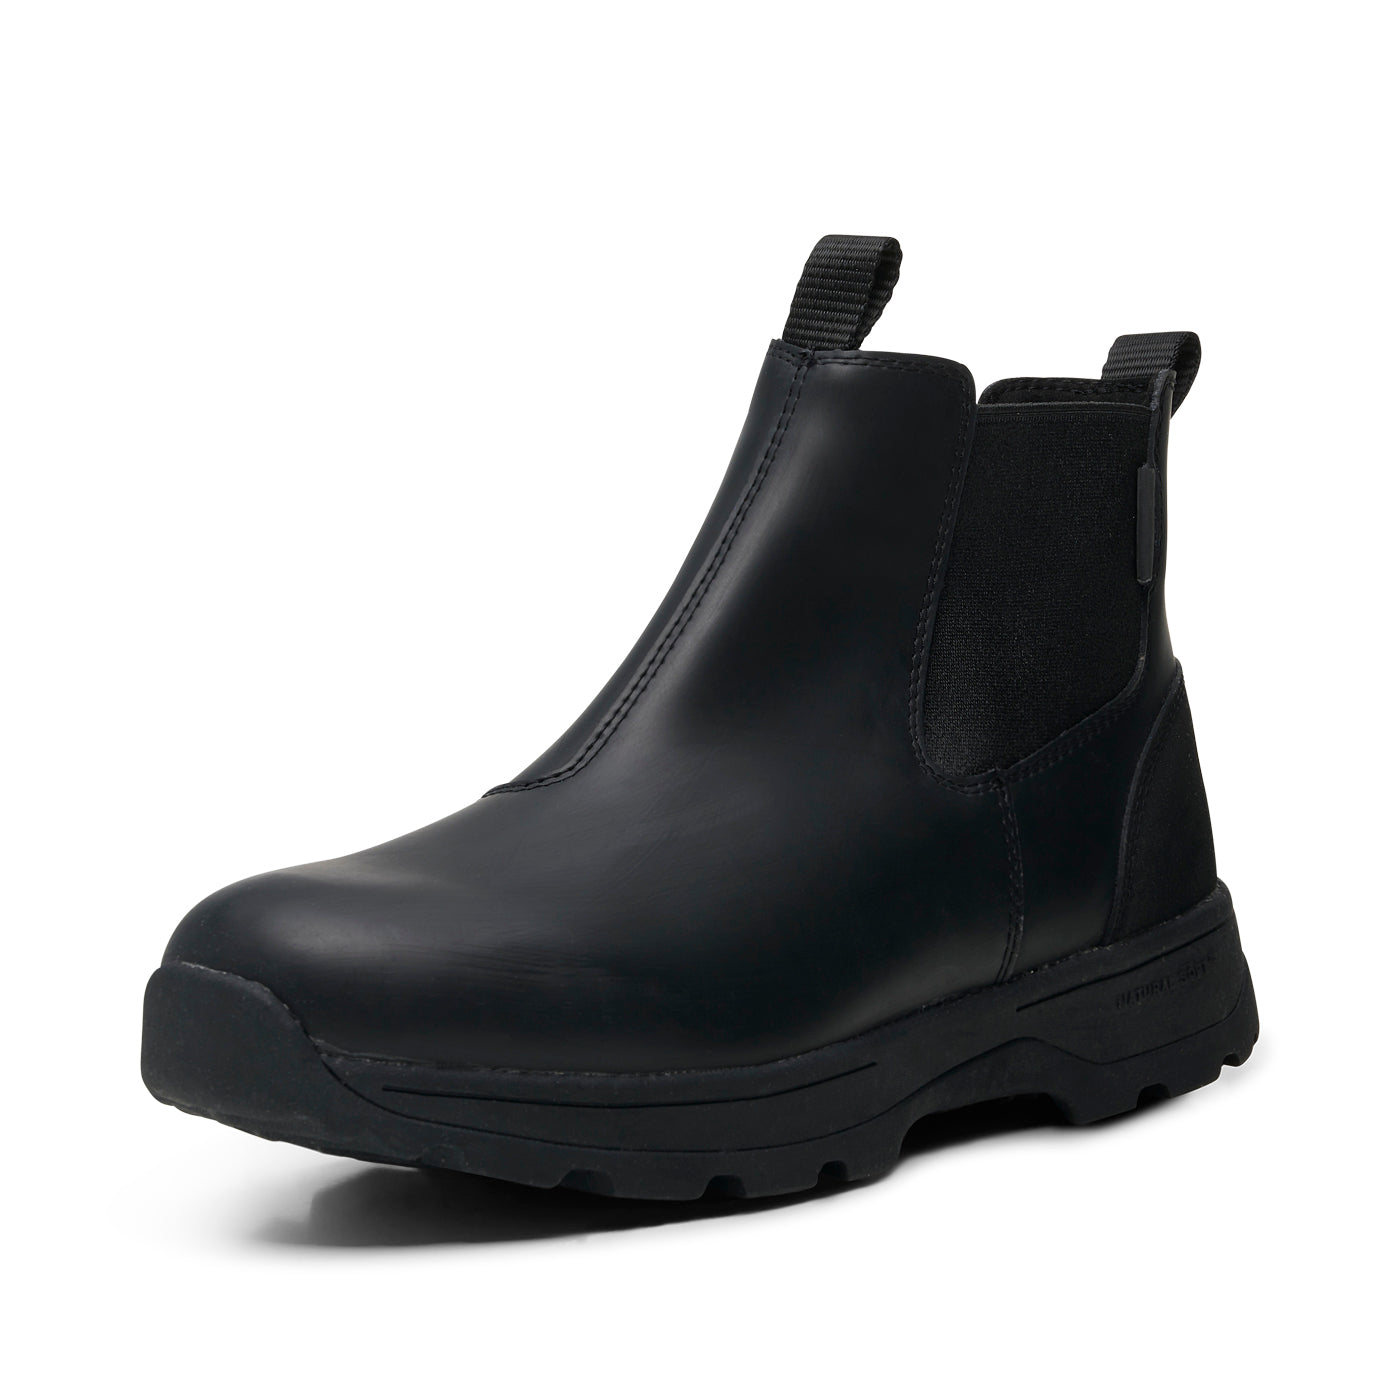 WODEN MENS Marvin Track Waterproof Reflective Rubber Boots 020 Black